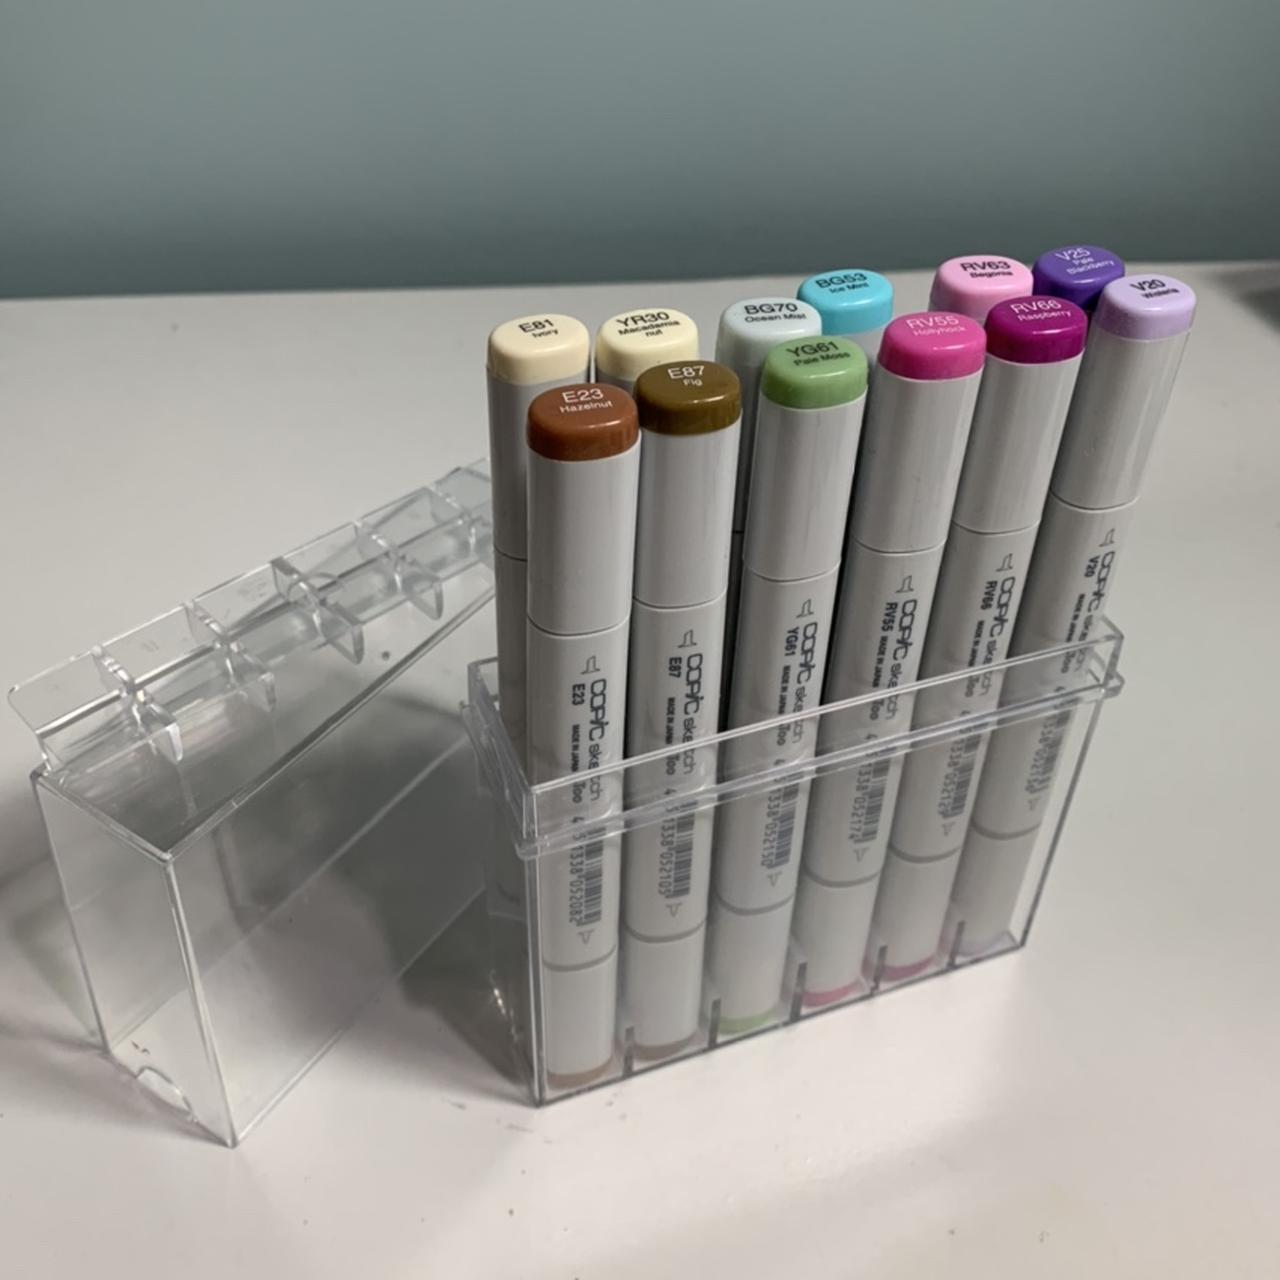 Lot of 25 Copic Sketch.. Alcohol Markers. You choose!